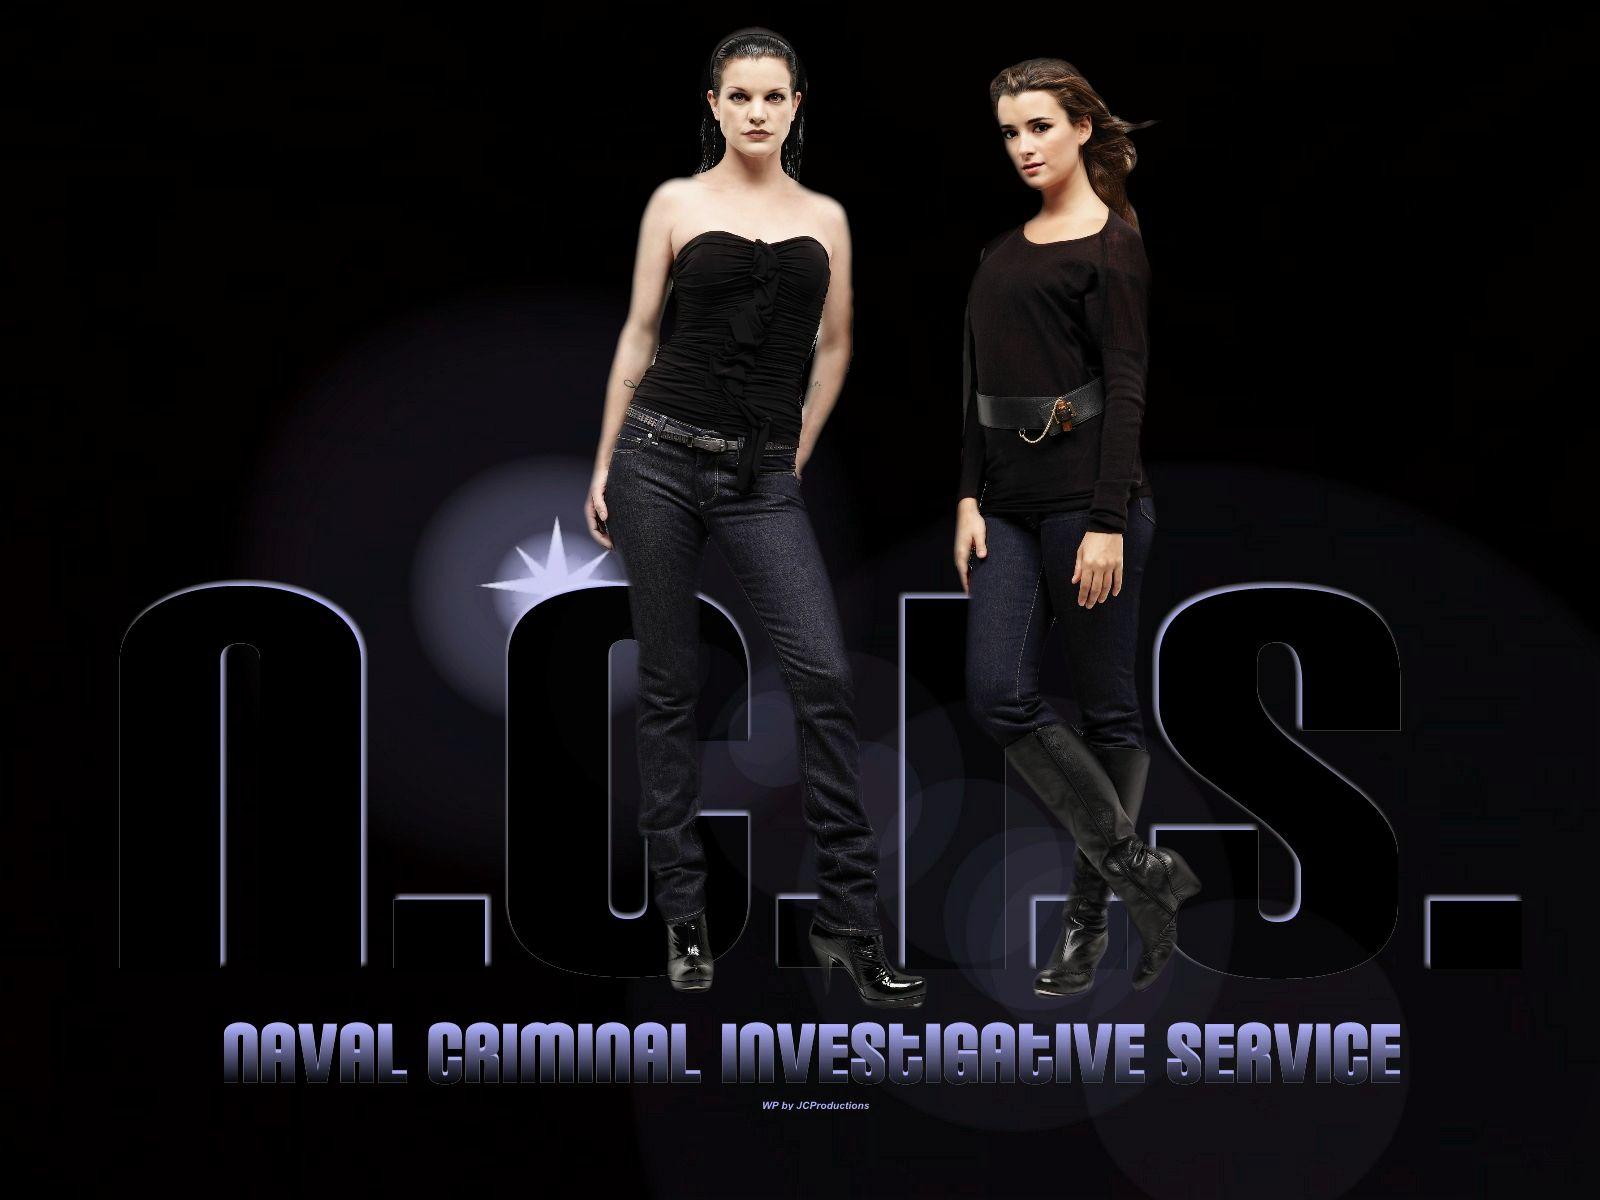 Women of NCIS image Abby & Ziva HD wallpaper and background